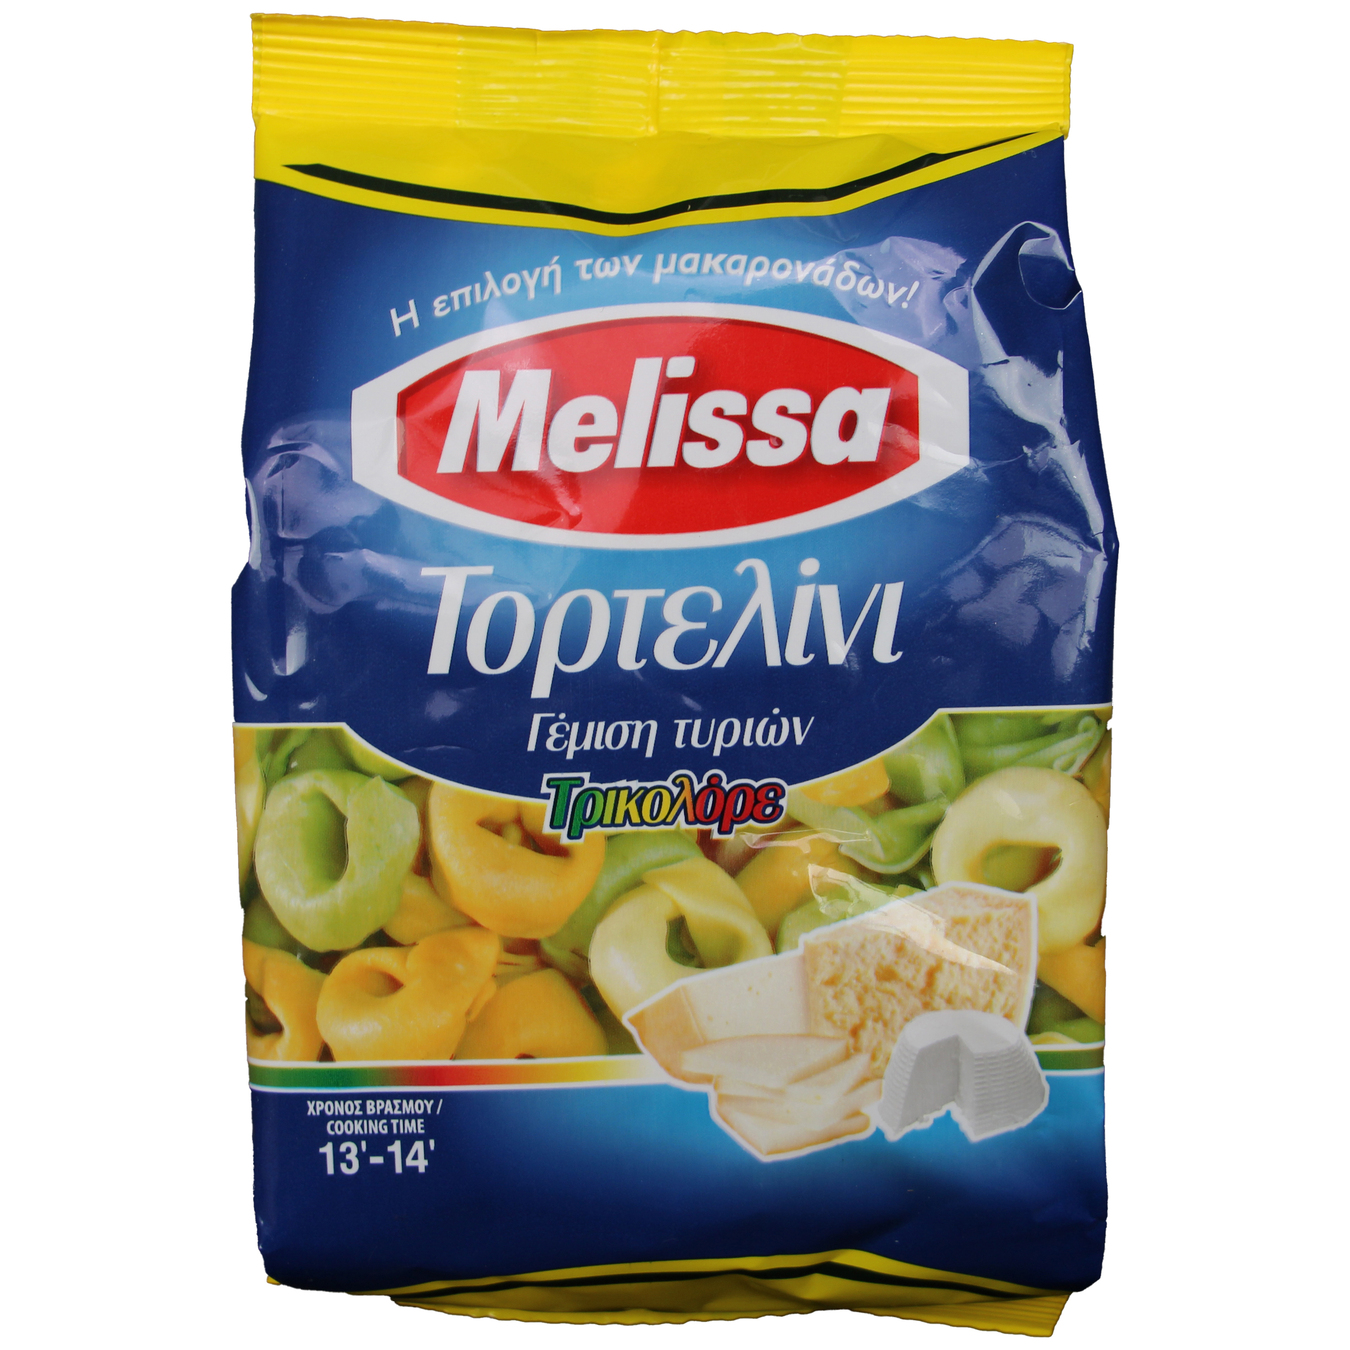 Melissa Tortellini Tricolor Stuffed with Cheese Egg Pasta 250g